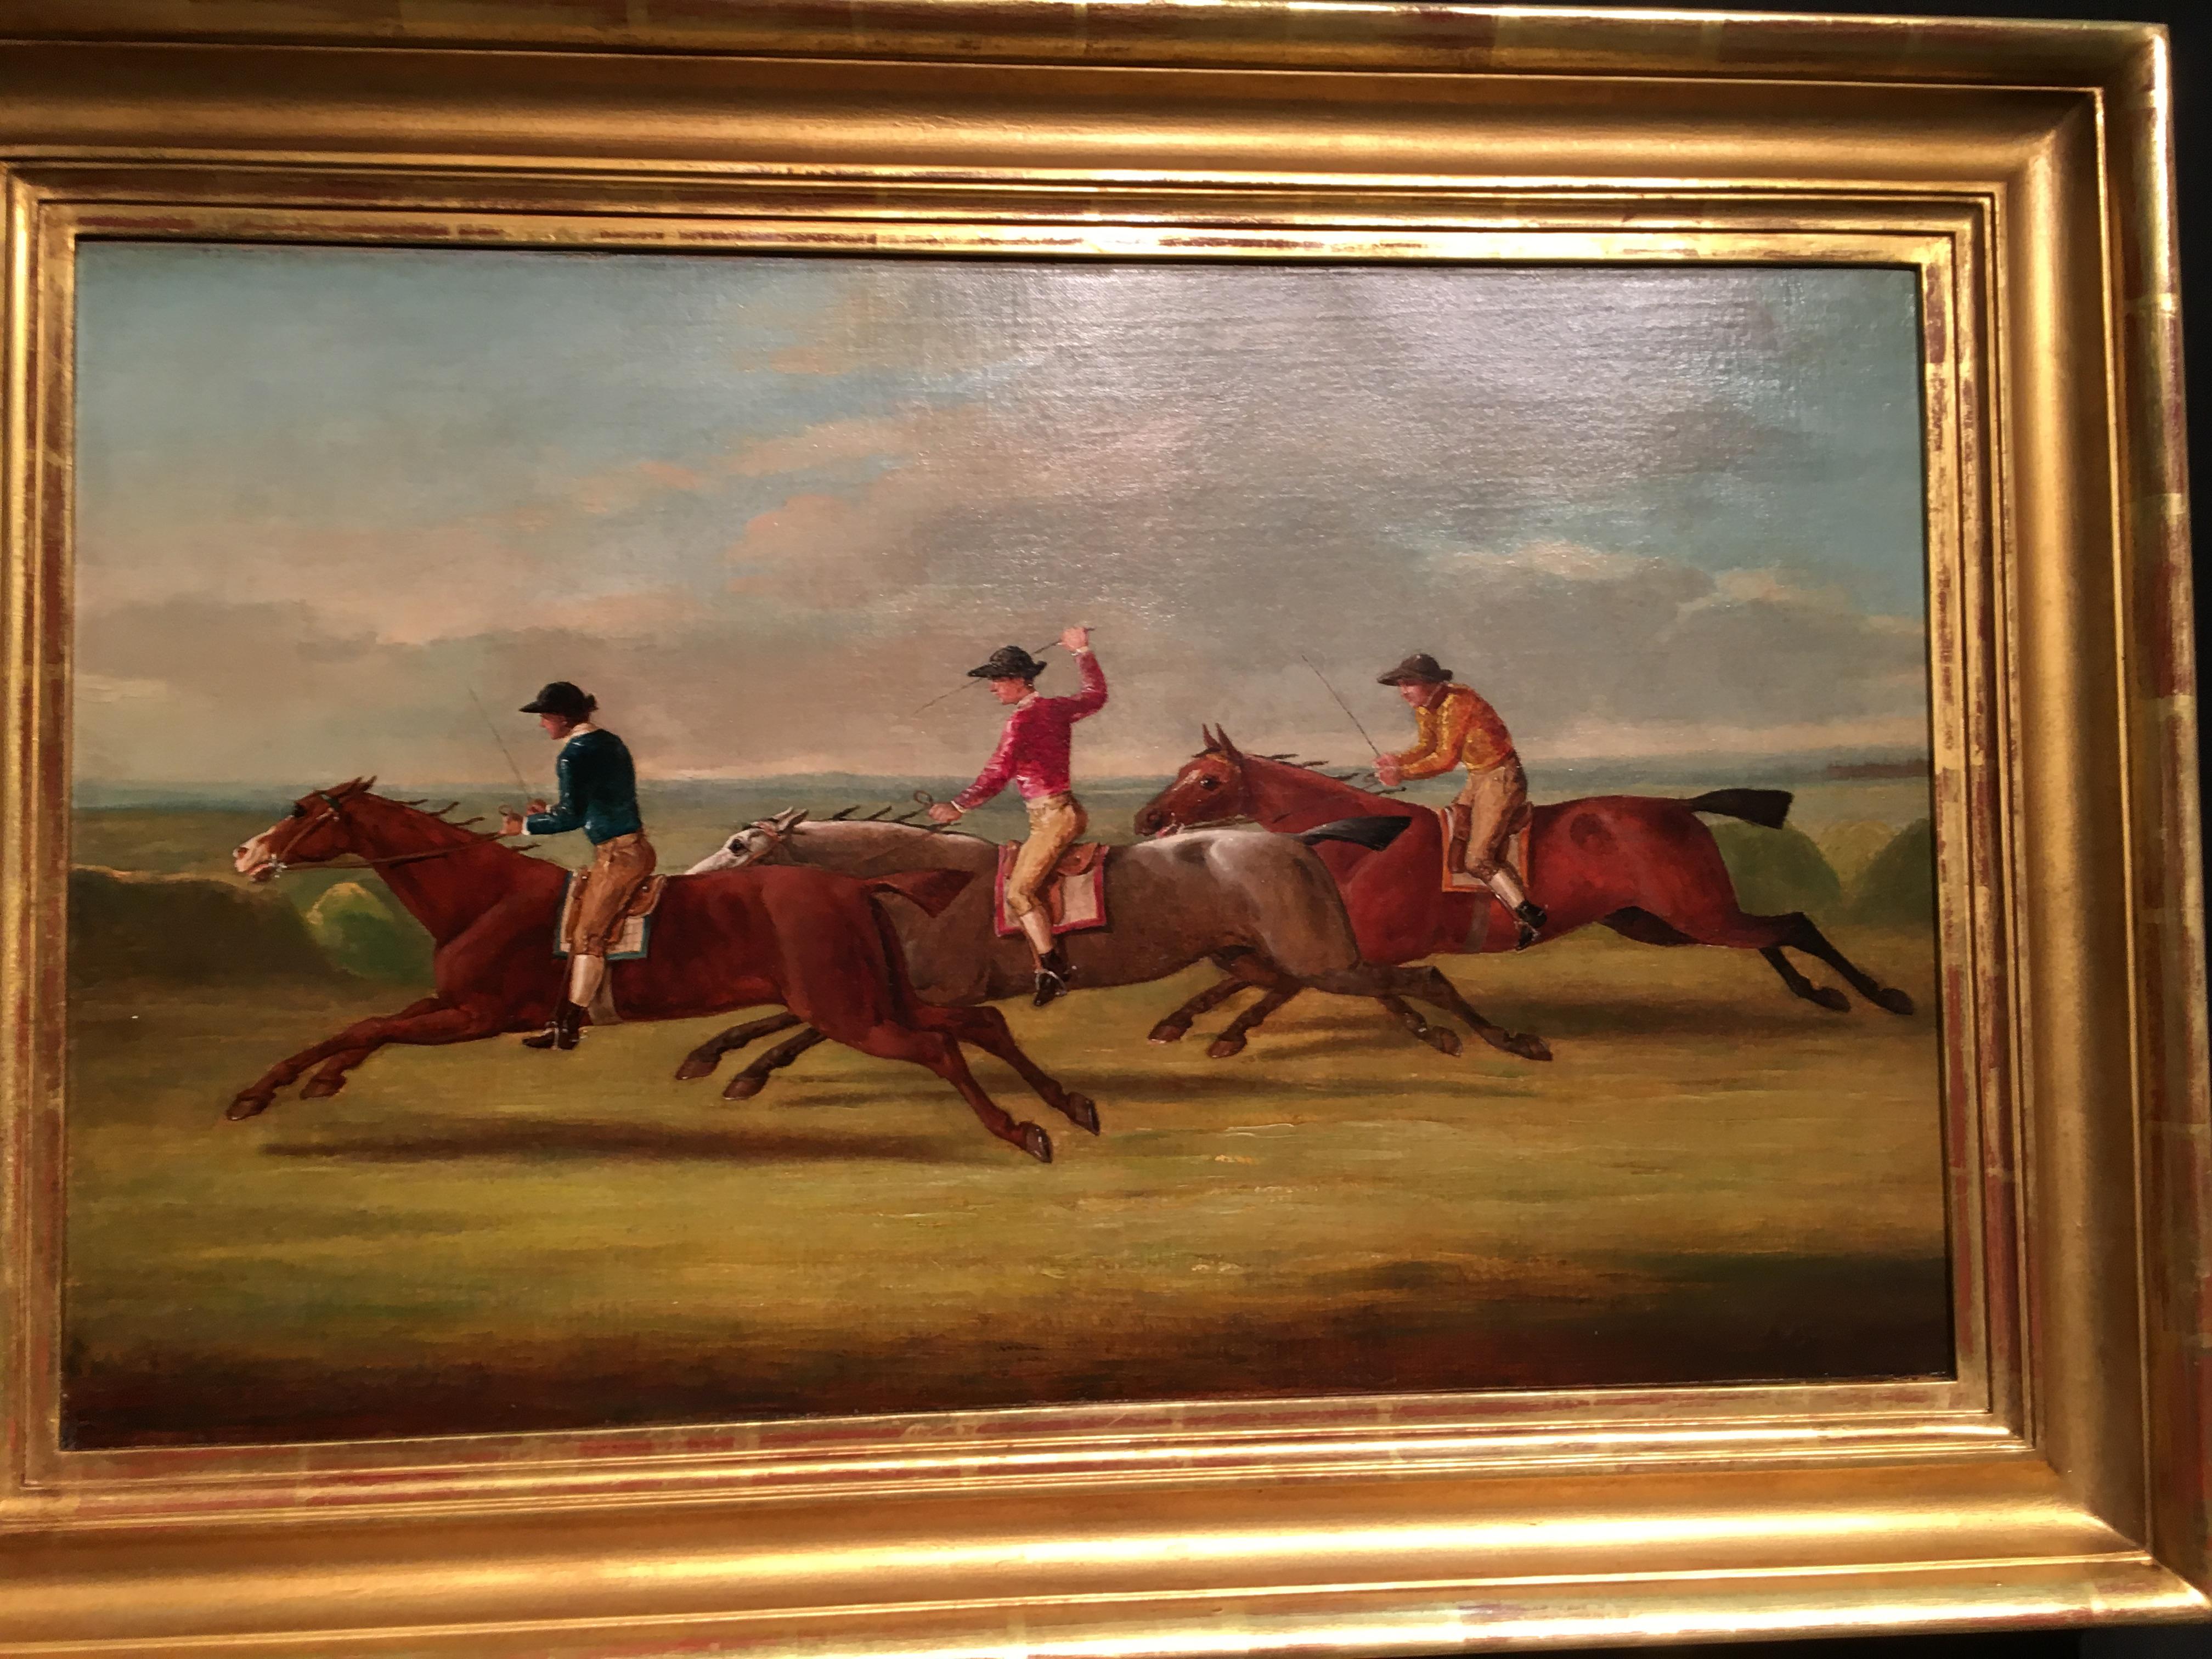 English horse racing scene with three horses and jockeys in mid gallop - Painting by John Nost Sartorius